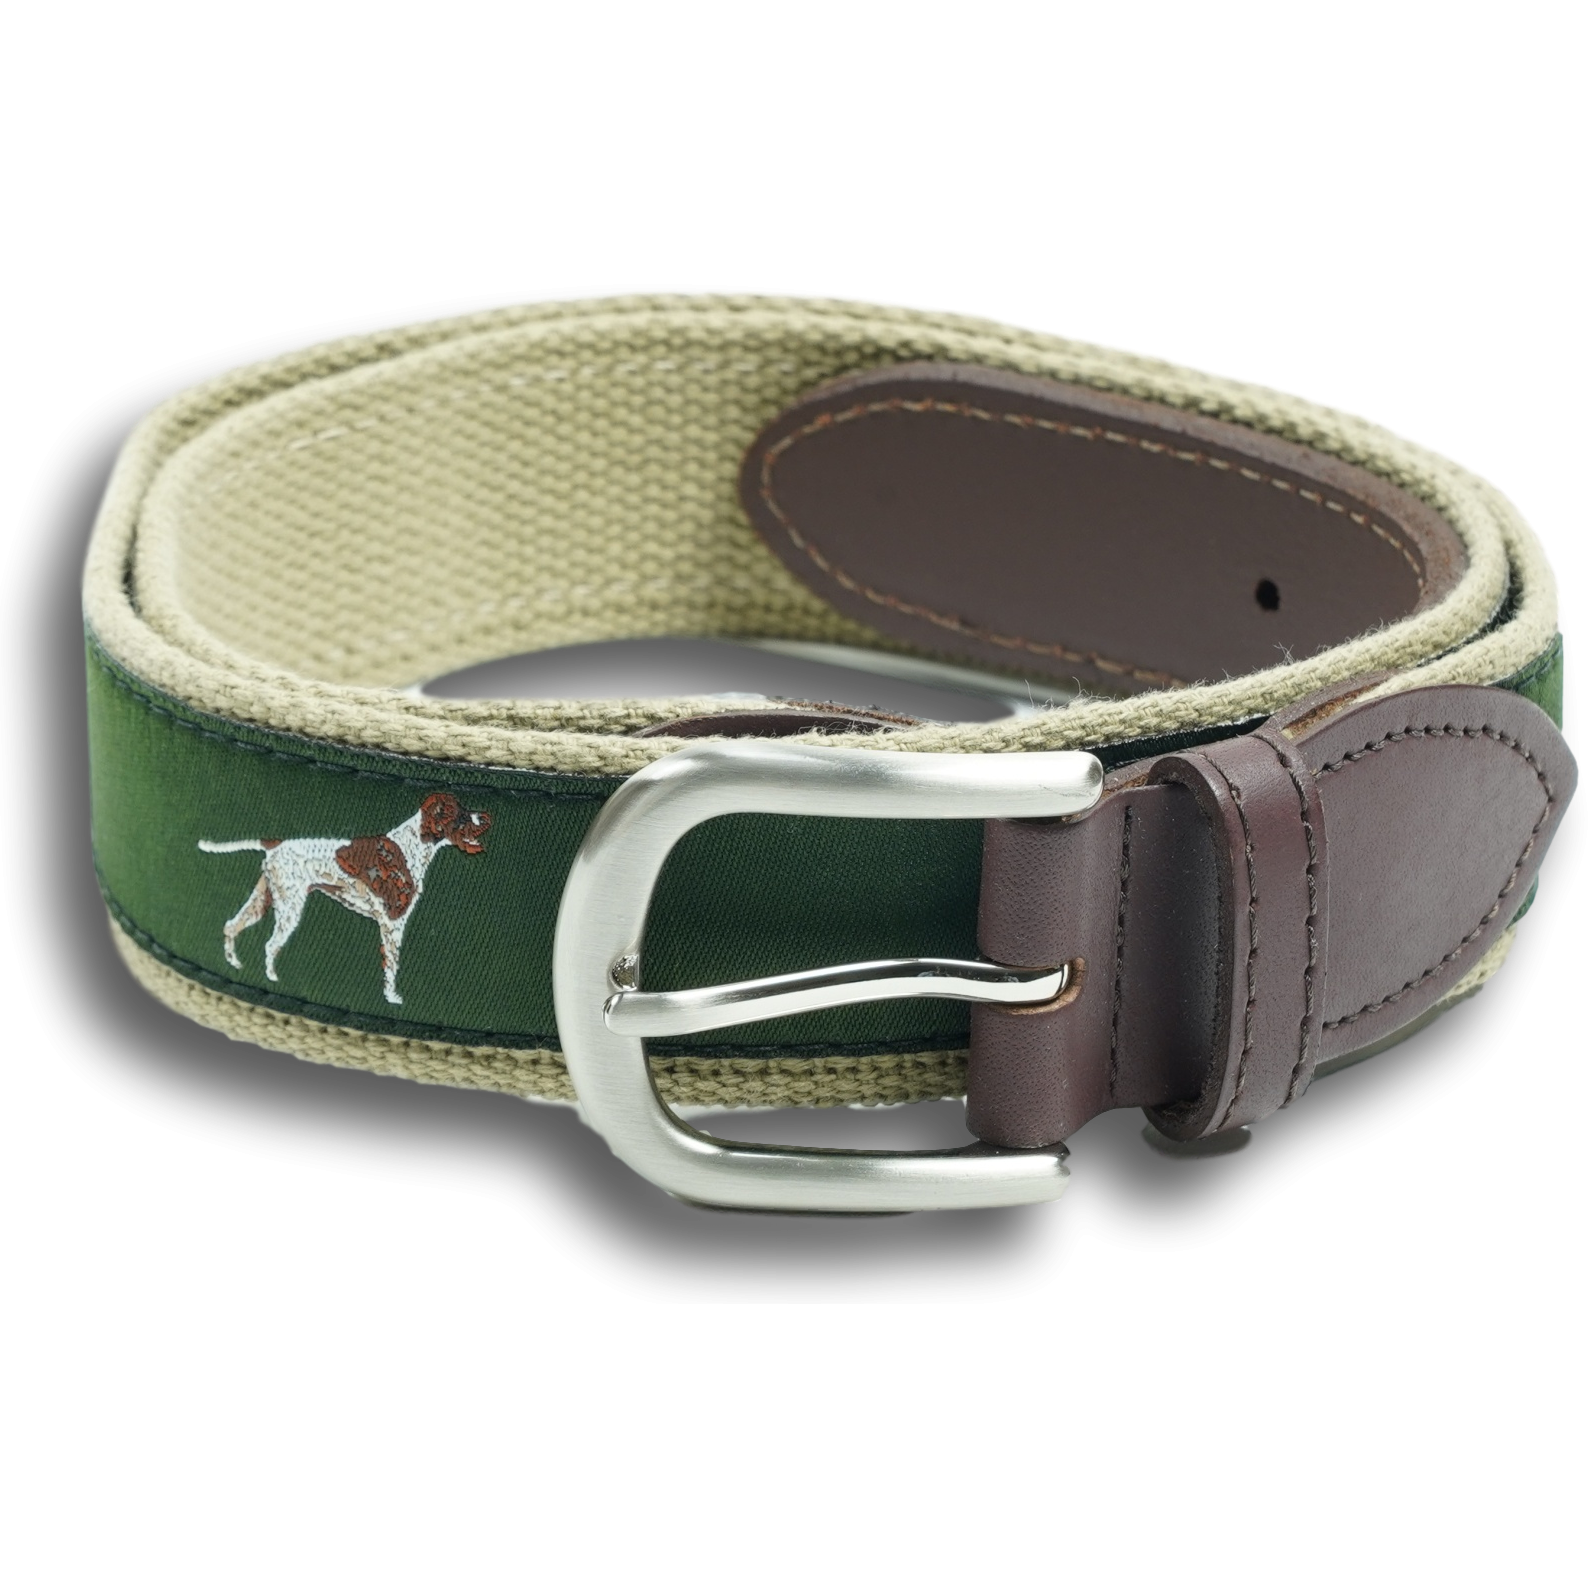 Sporting Dogs Leather Tab Belt